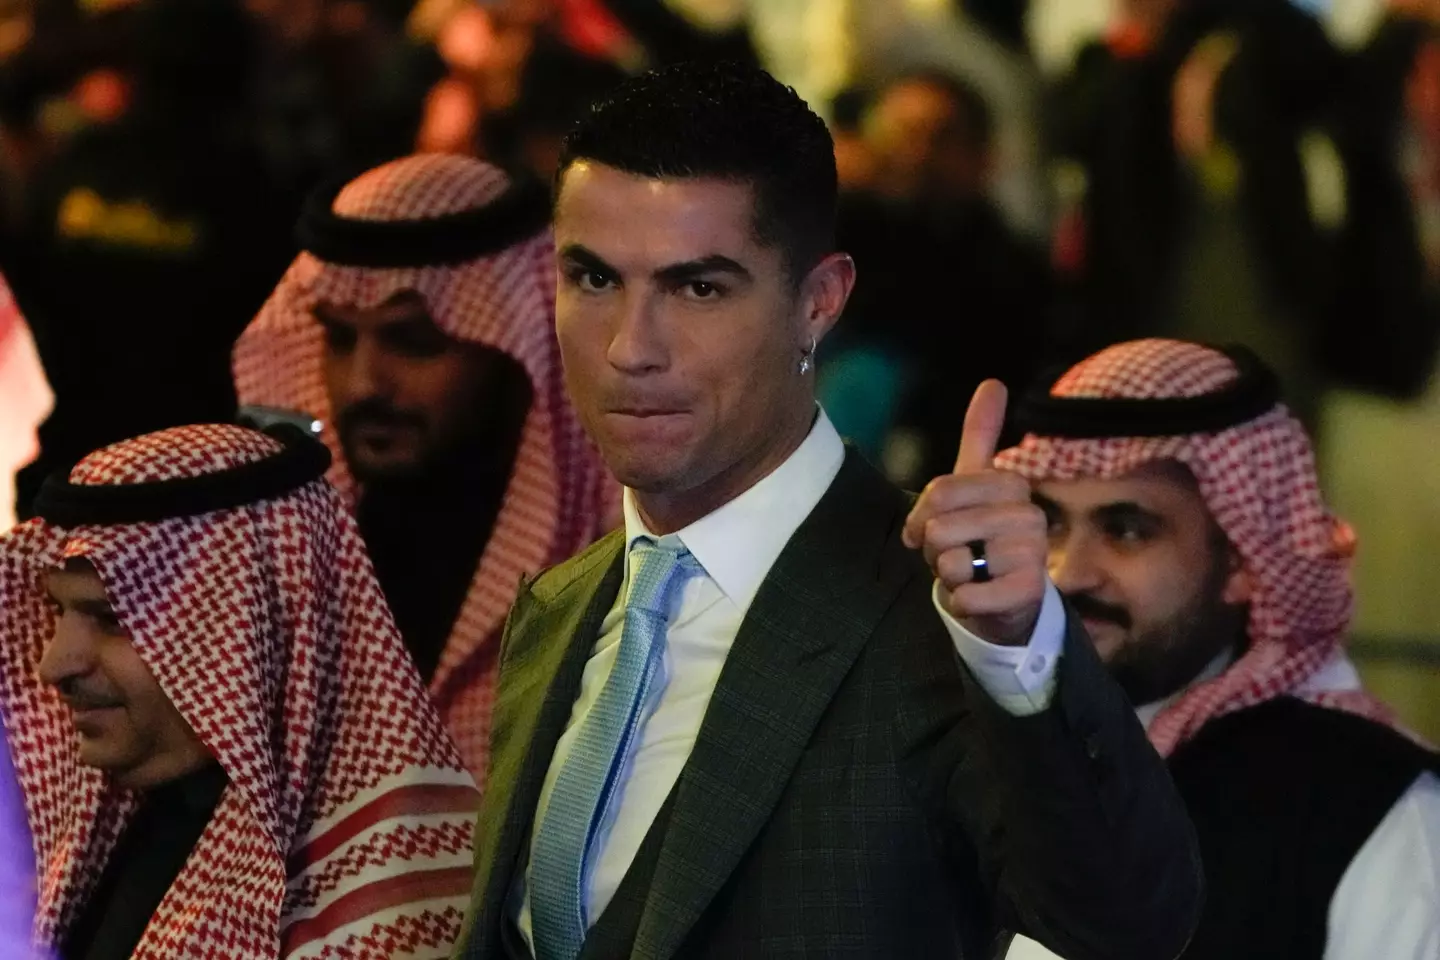 Ronaldo believes the Saudi Pro League is more competitive than it receives credit for. (Image